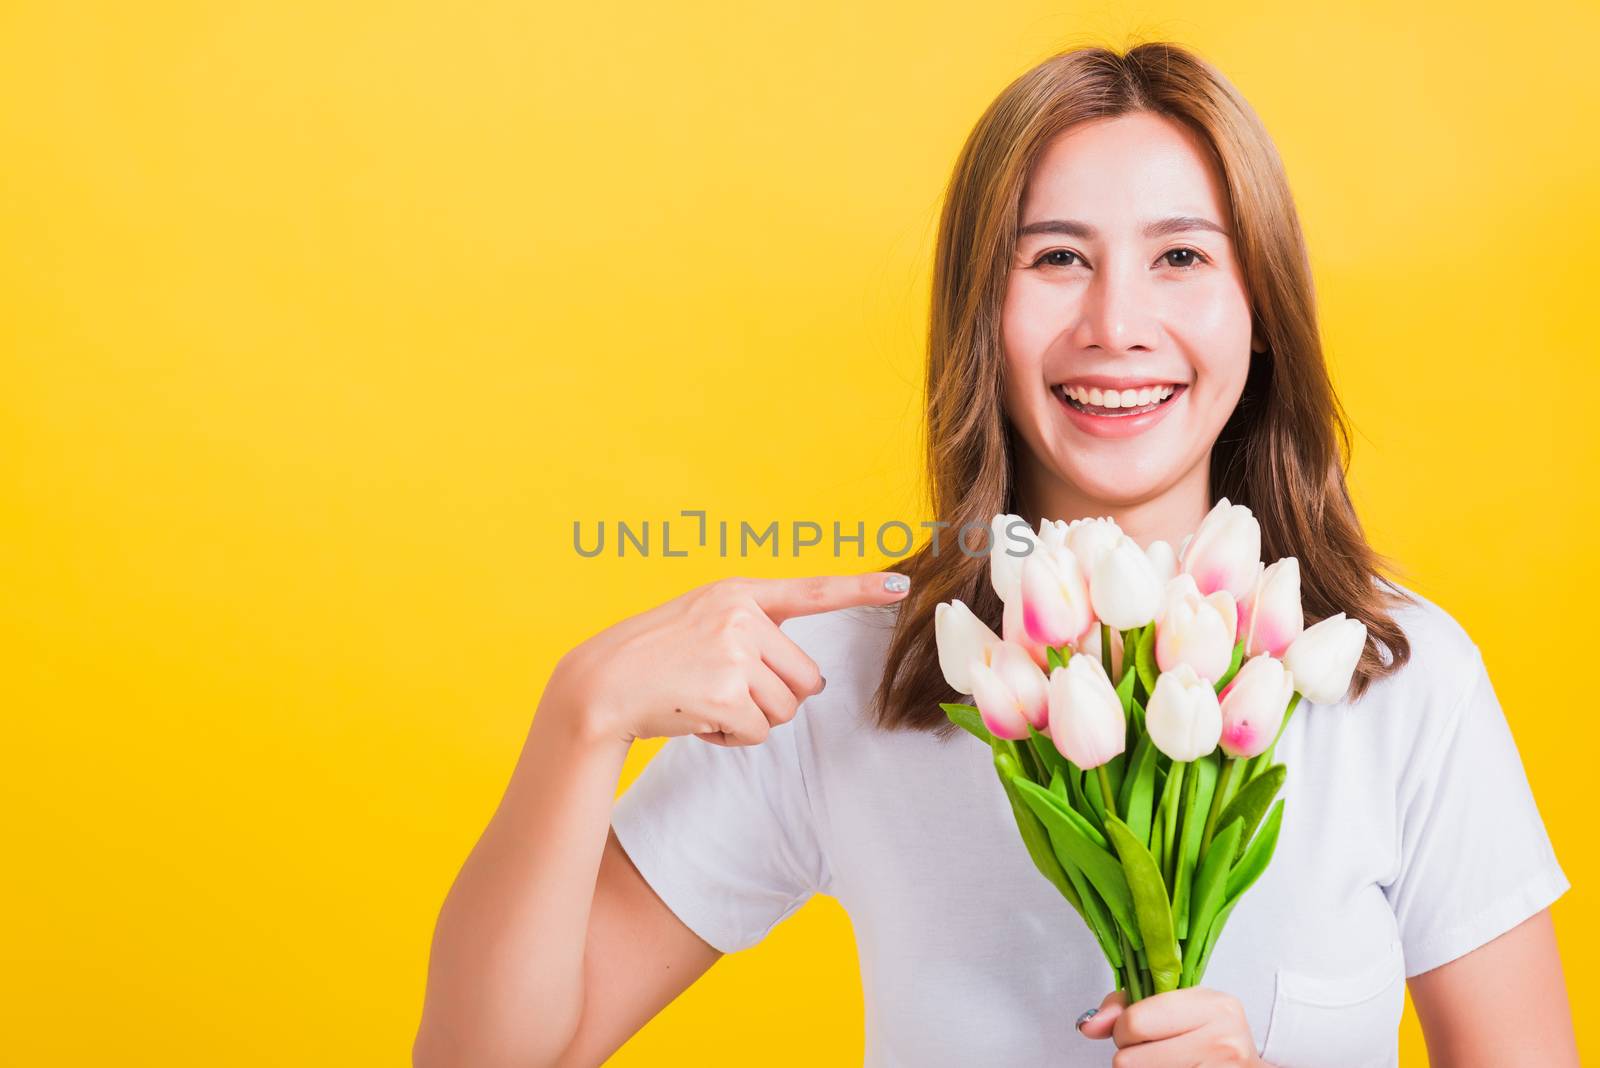 Portrait Asian Thai beautiful happy young woman smiling, screaming excited hold flowers tulips bouquet in hands and point finger to flowers, studio shot isolated on yellow background, with copy space